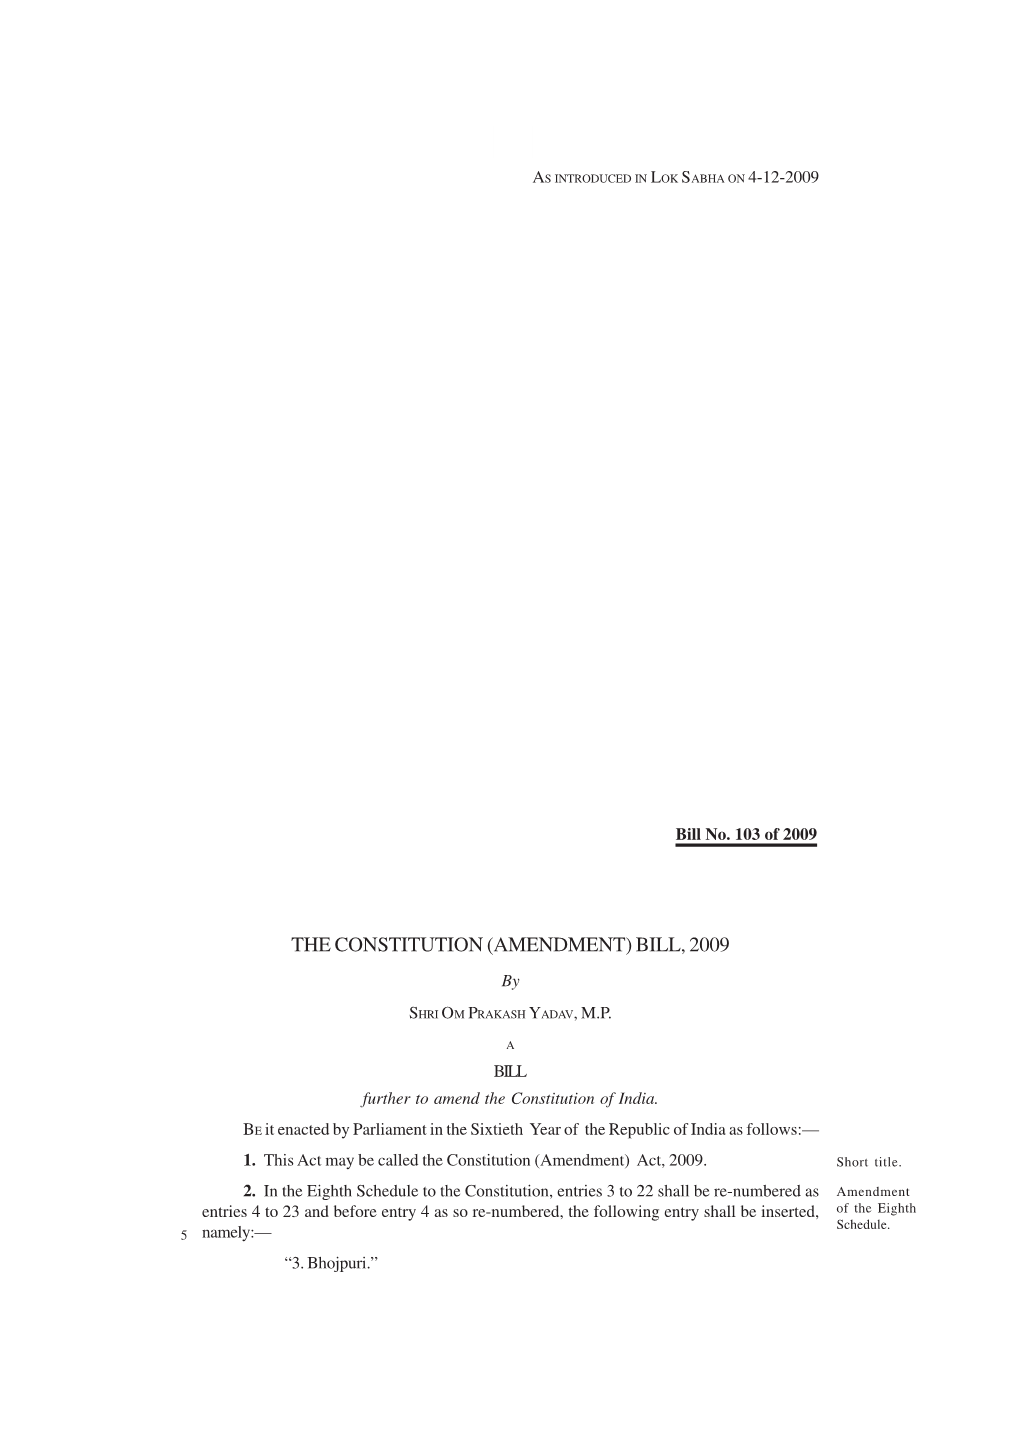 THE CONSTITUTION (AMENDMENT) BILL, 2009 By